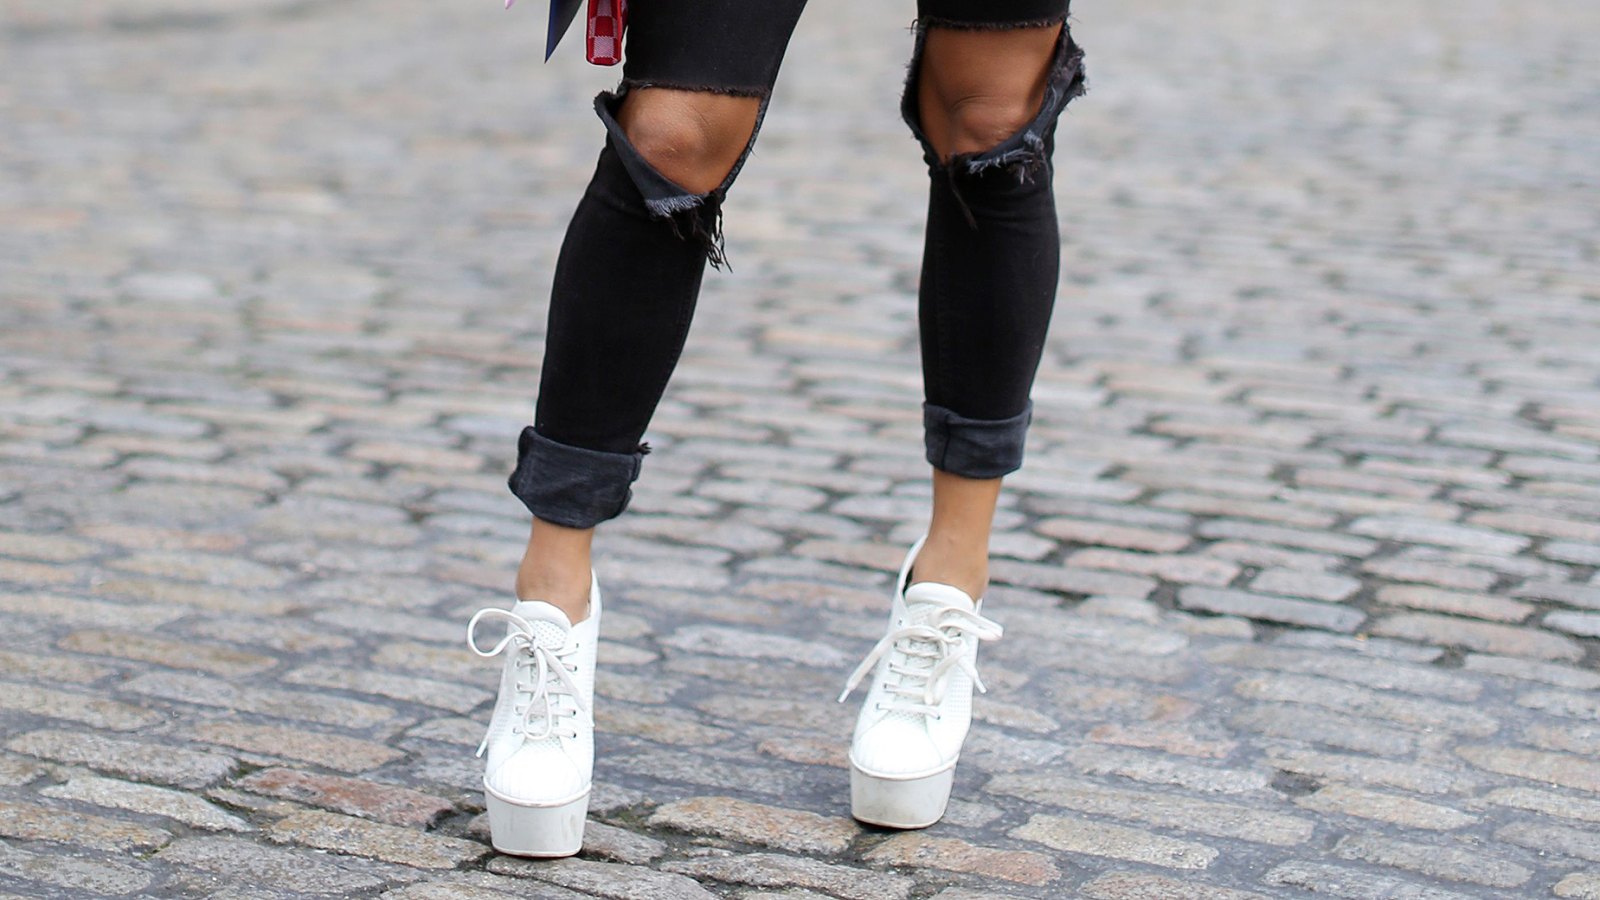 plein Octrooi regel Our Picks: The Best Platform Sneakers to Suit Your Style